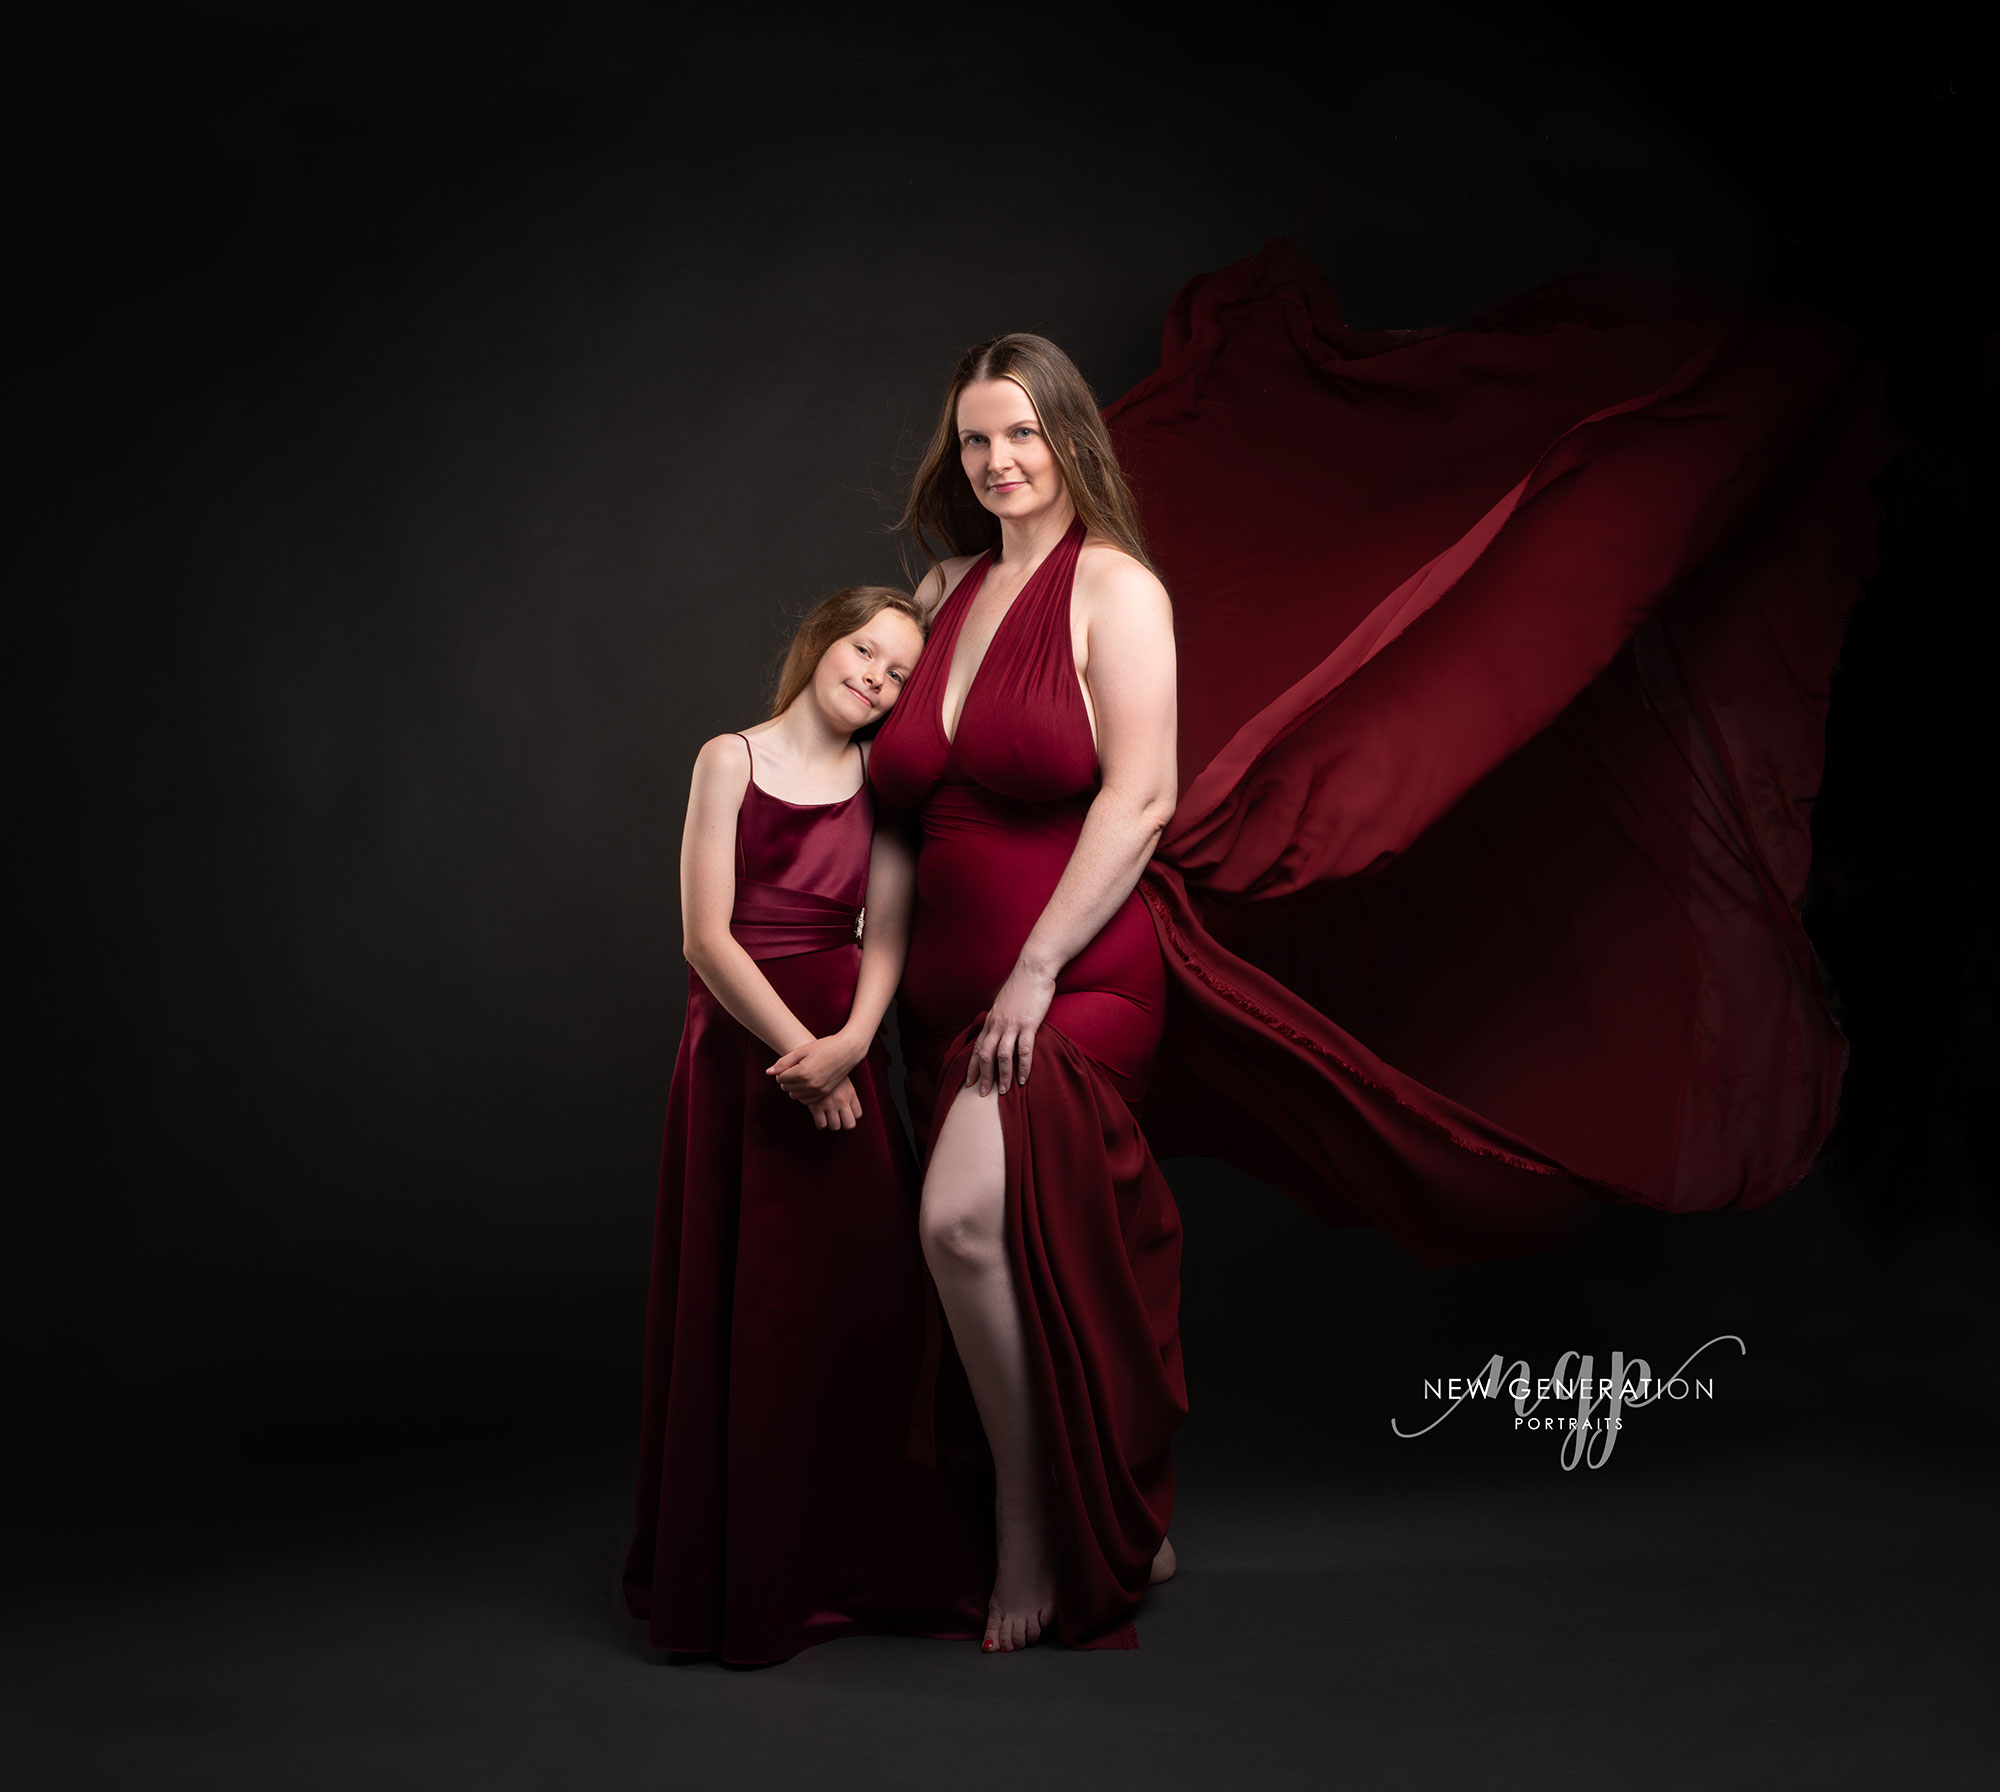 Mum and daughter on dark background wearing red dresses with wind in hair and dress. Very elegant posing. Captured by New Generation Portraits